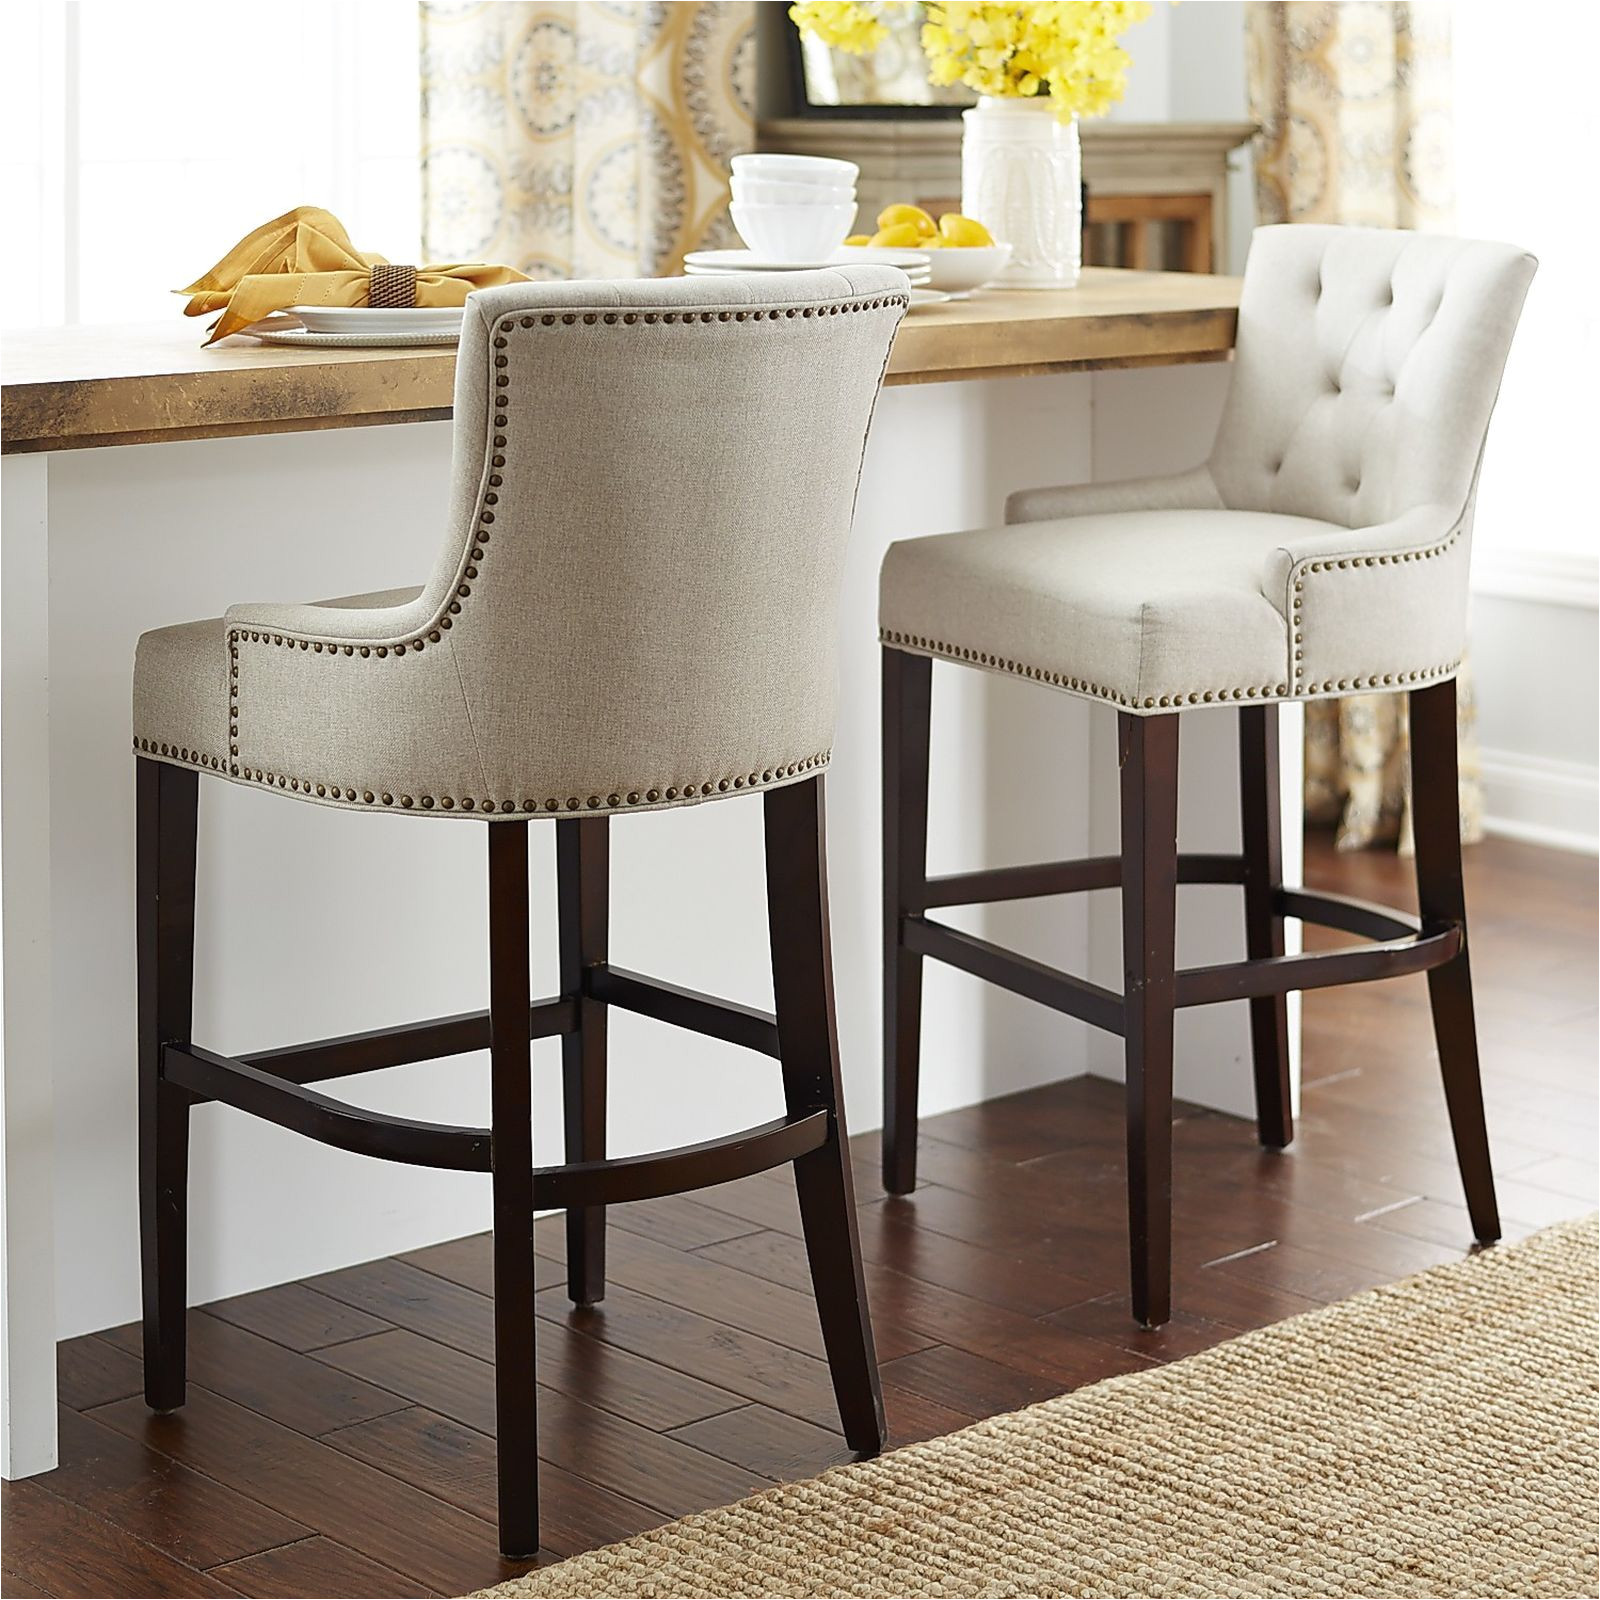 our ava stools offer a most elegant perch classic tailoring includes a comfortable contoured back with deep button tufting low slung swoop armrests